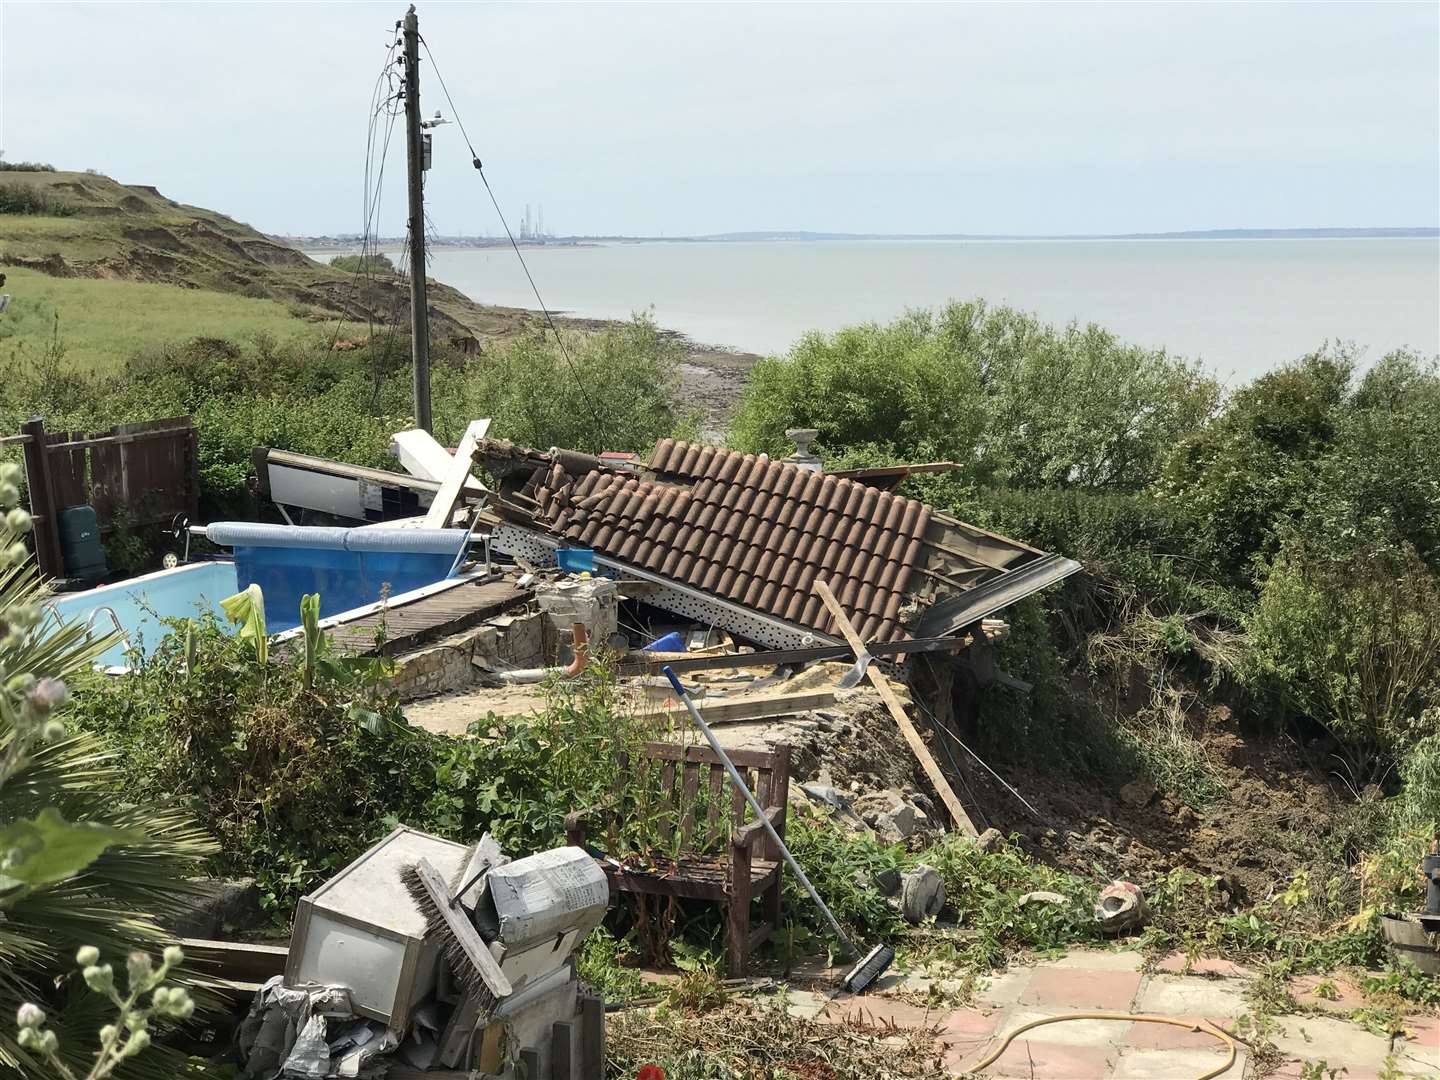 Emma Tullett's family home fell off the cliff at Eastchurch after a landslide left it teetering on the edge